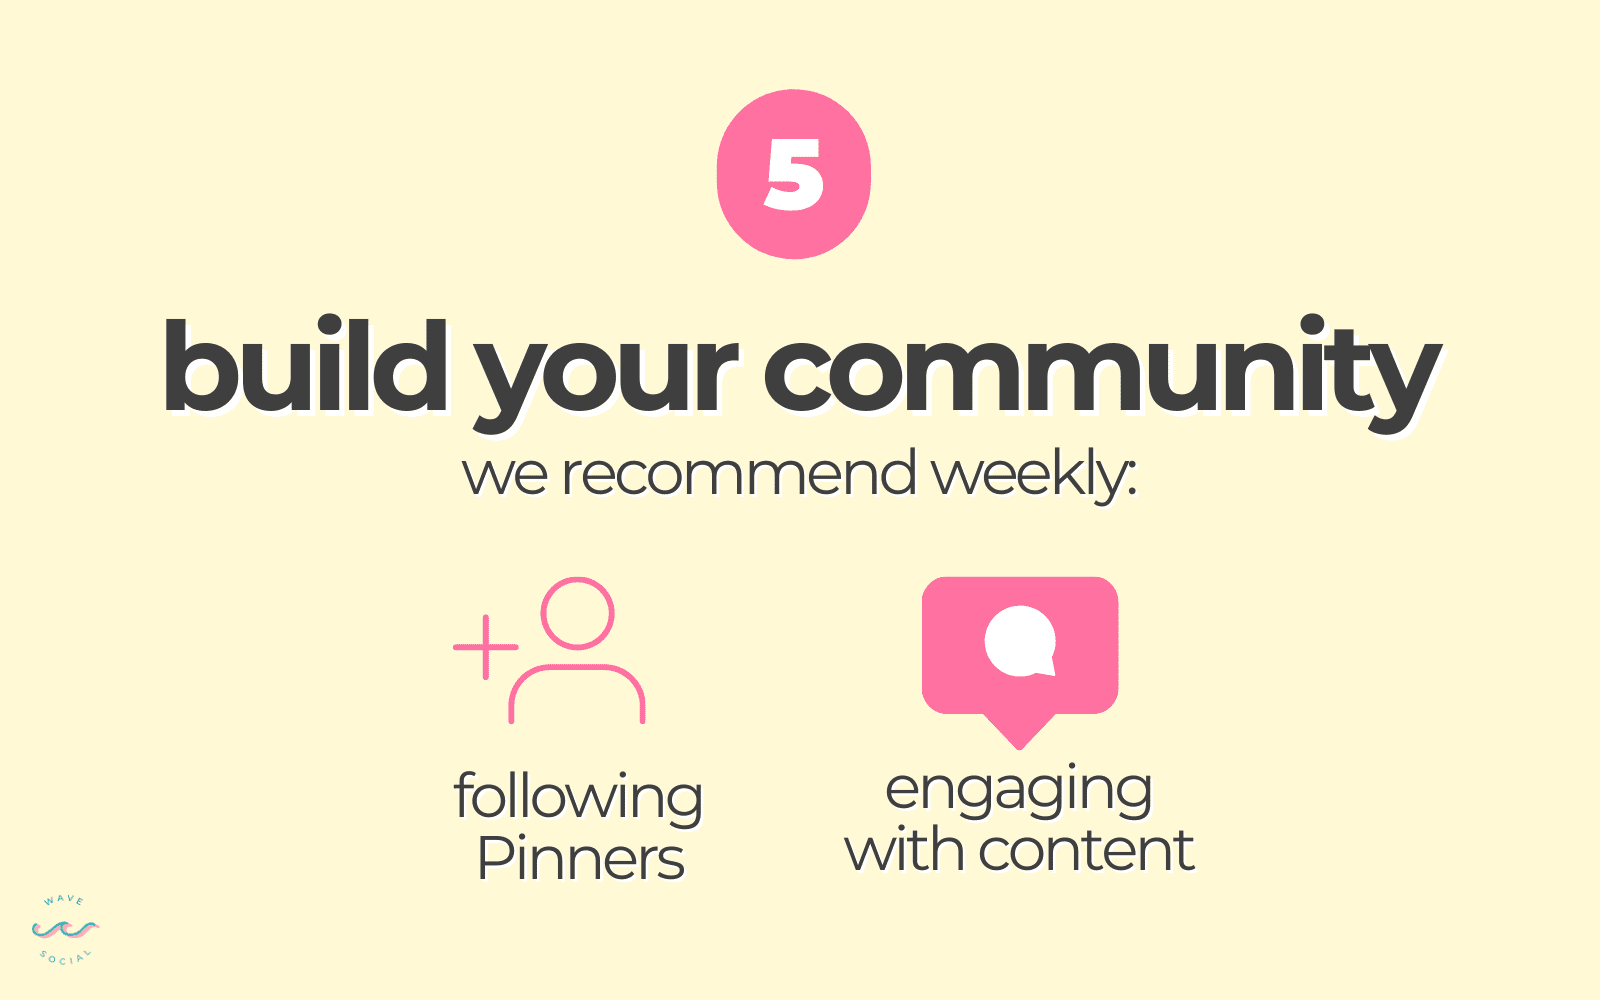 build your community by following Pinners and engaging with content weekly